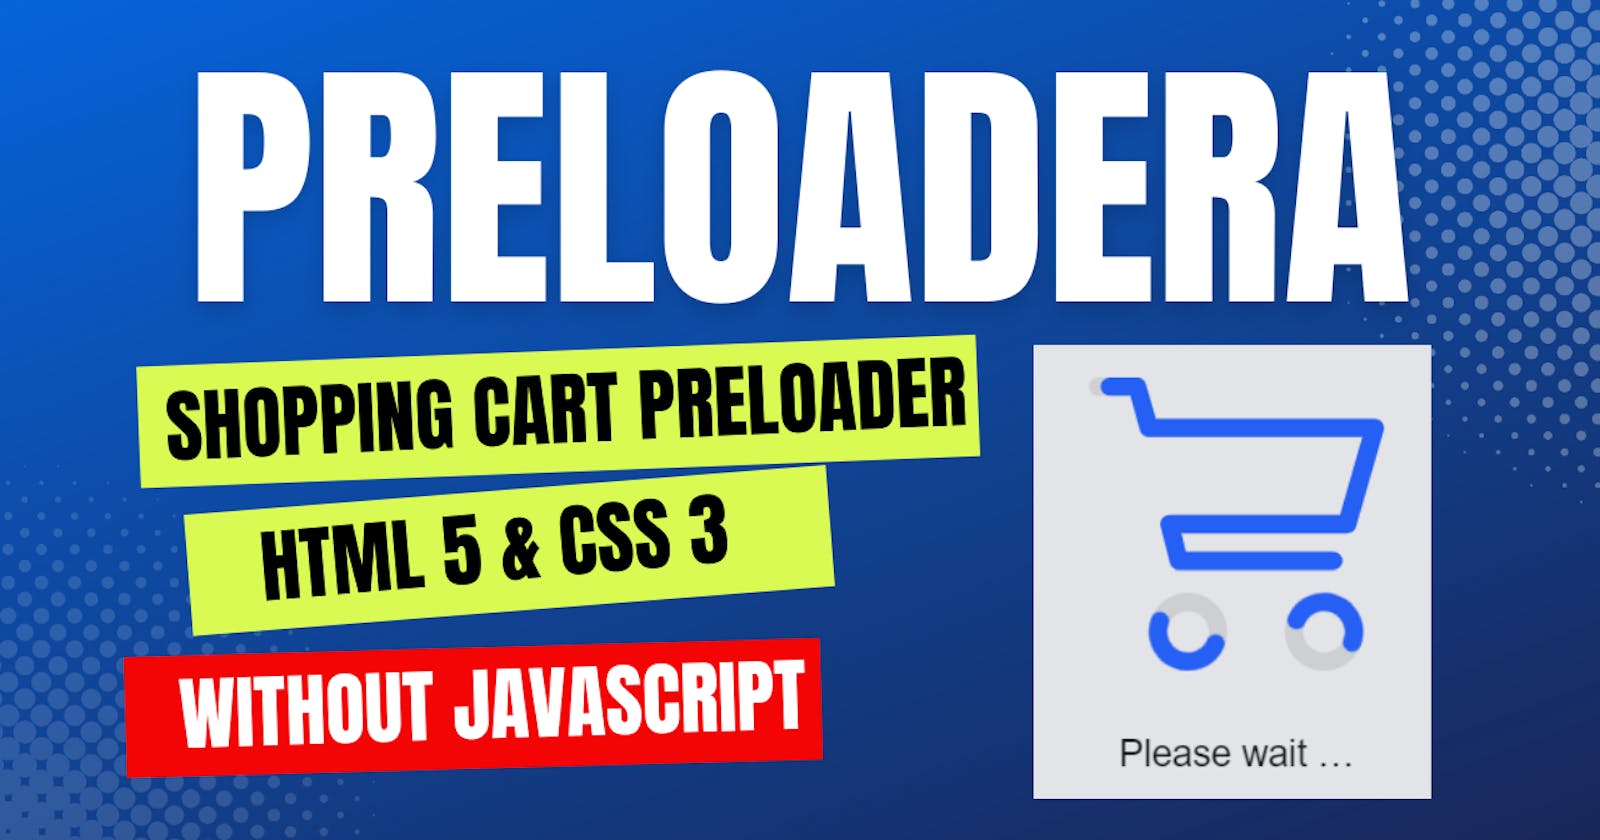 Shopping Cart Preloader With HTML 5 & CSS 3